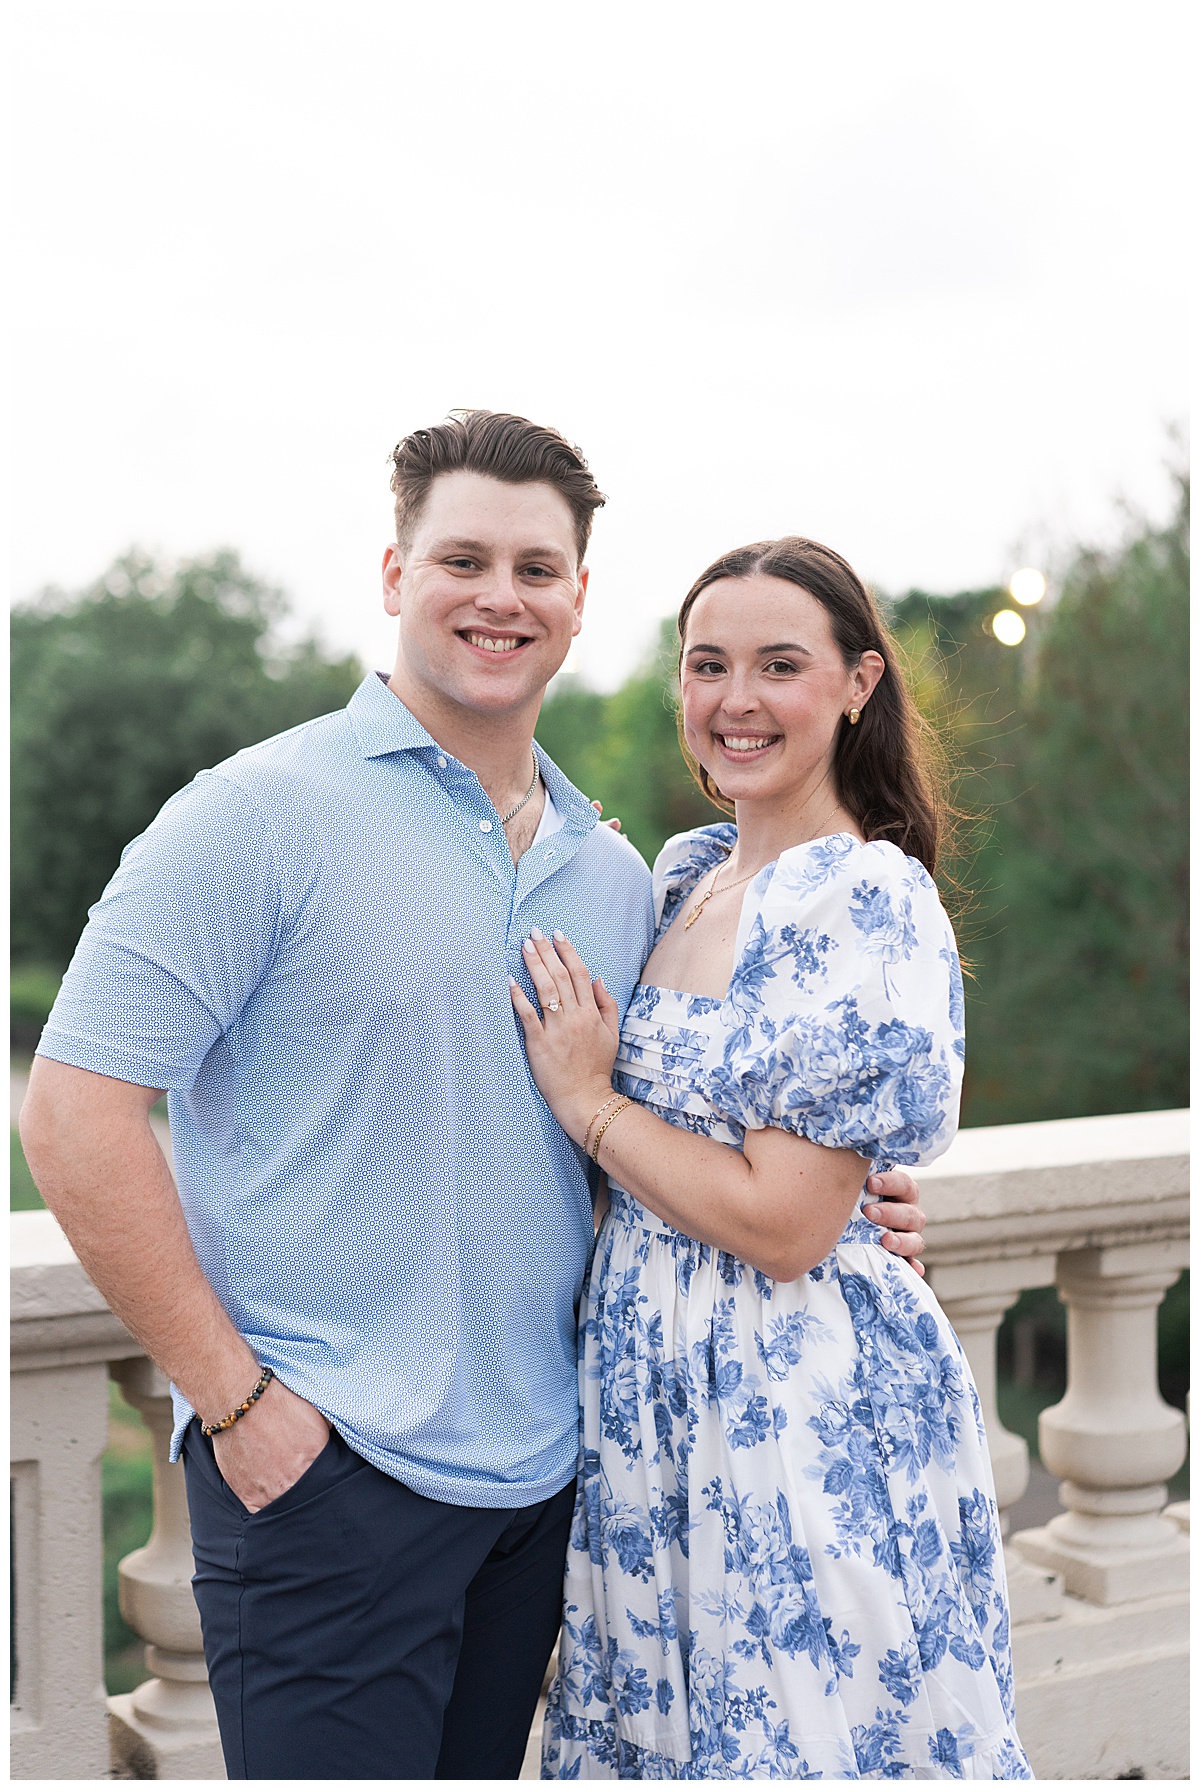 Man and woman share a smile together during their Eleanor Tinsley Park Engagement Session